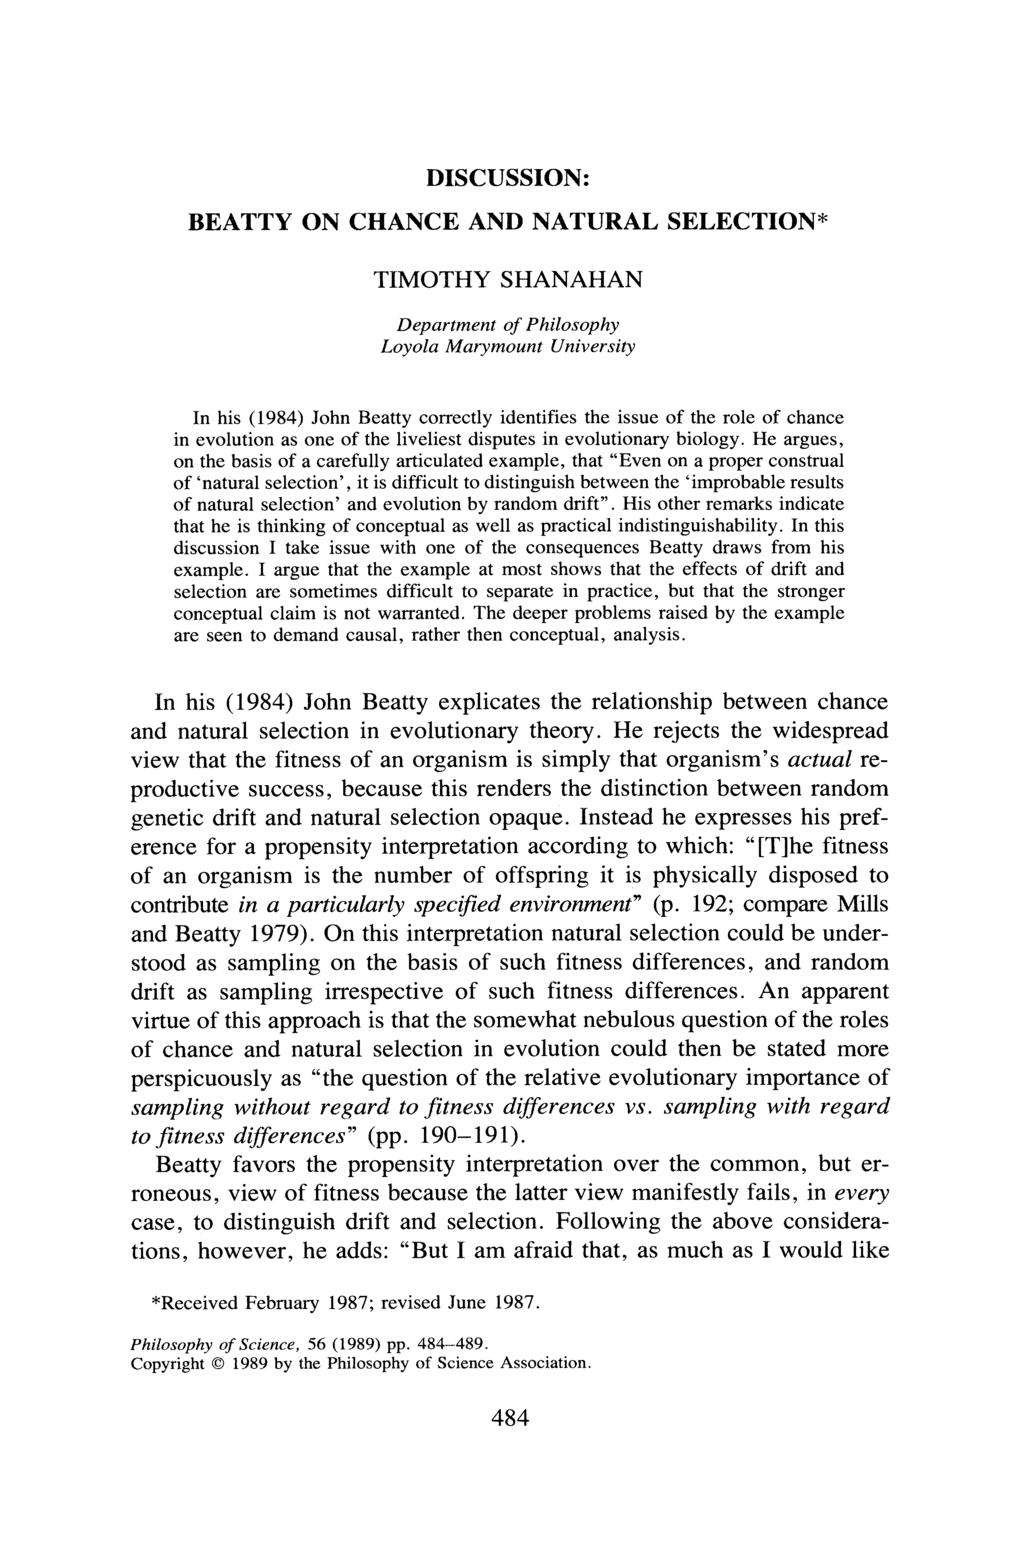 DISCUSSION: BEATTY ON CHANCE AND NATURAL SELECTION* TIMOTHY SHANAHAN Department of Philosophy Loyola Marymount University In his (1984) John Beatty correctly identifies the issue of the role of